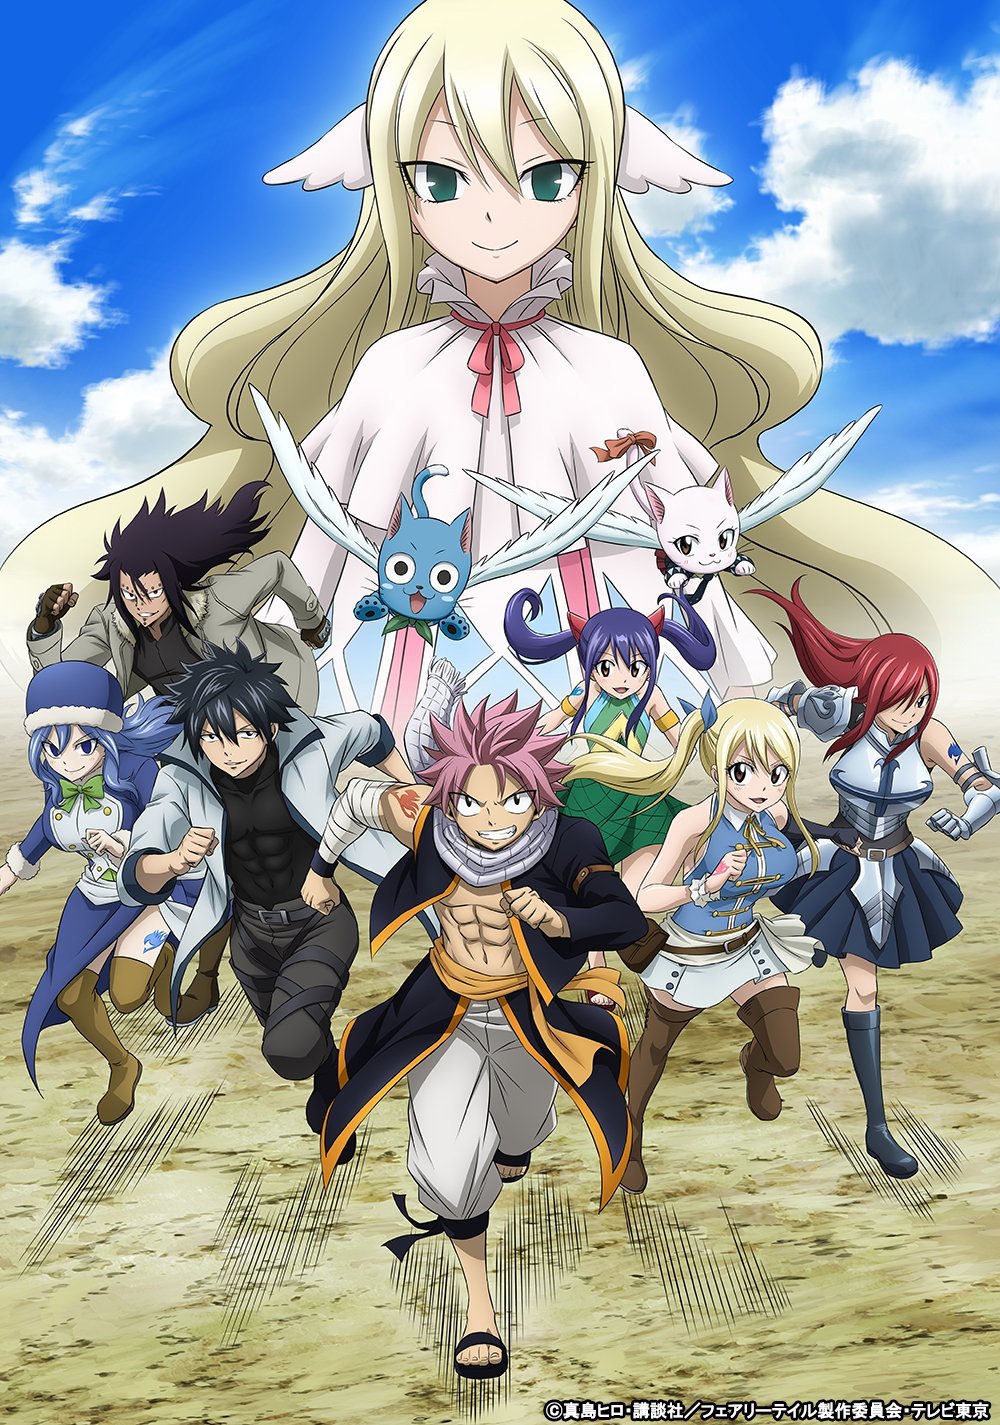 A new key visual for the âFairy Tailâ final anime series is now being displayed on its official website. Broadcast begins October 7th.